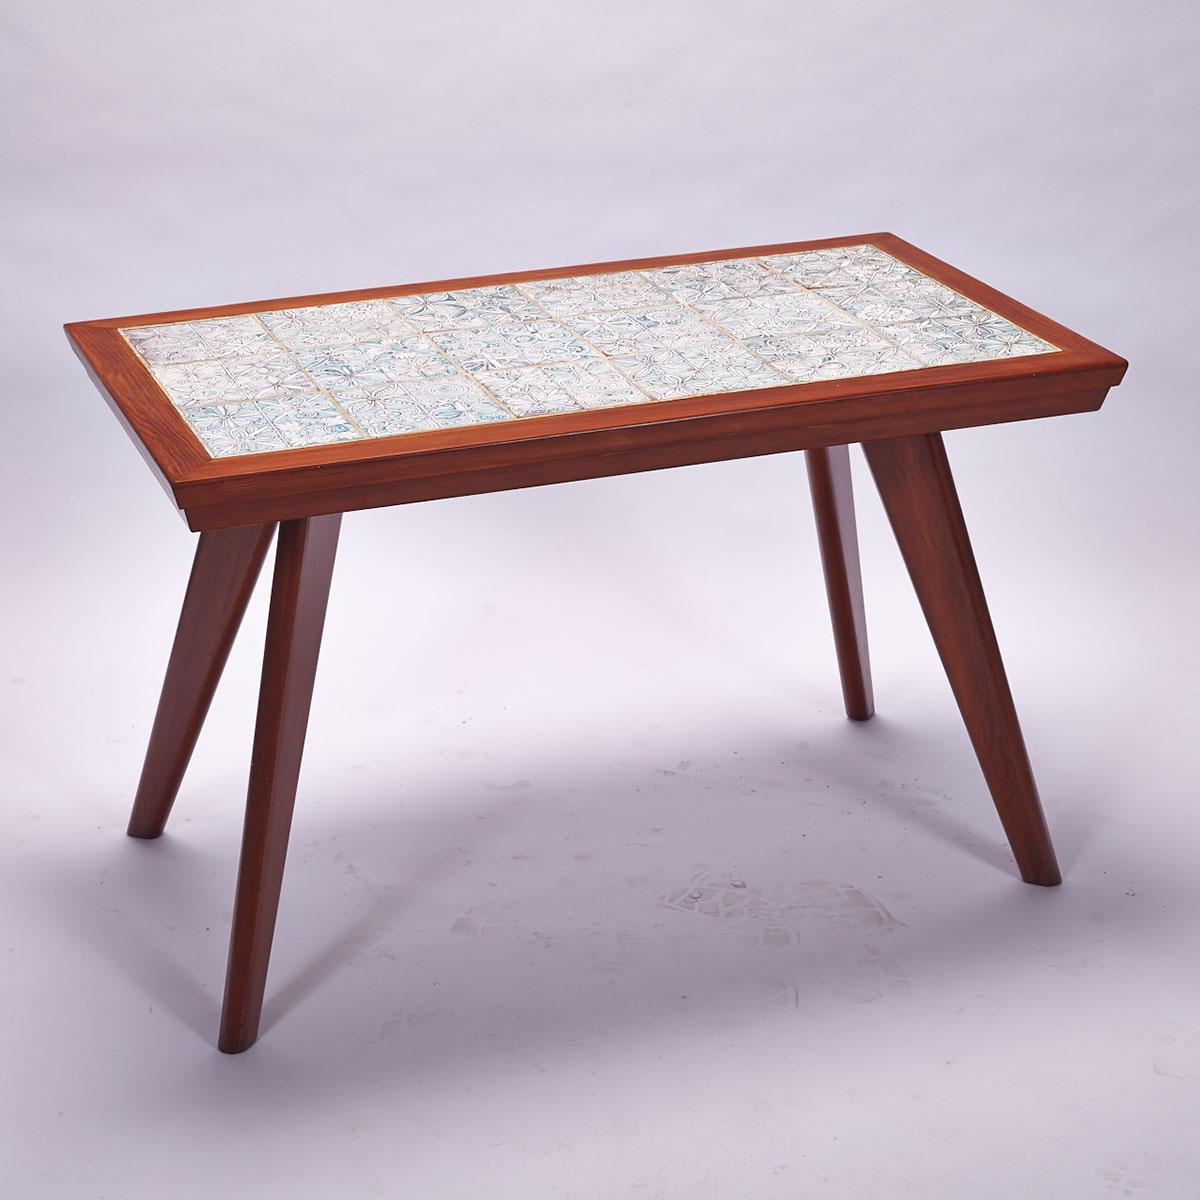 Brooklin Pottery Tile Topped Table, Theo, Susan and Ben Harlander, c.1960